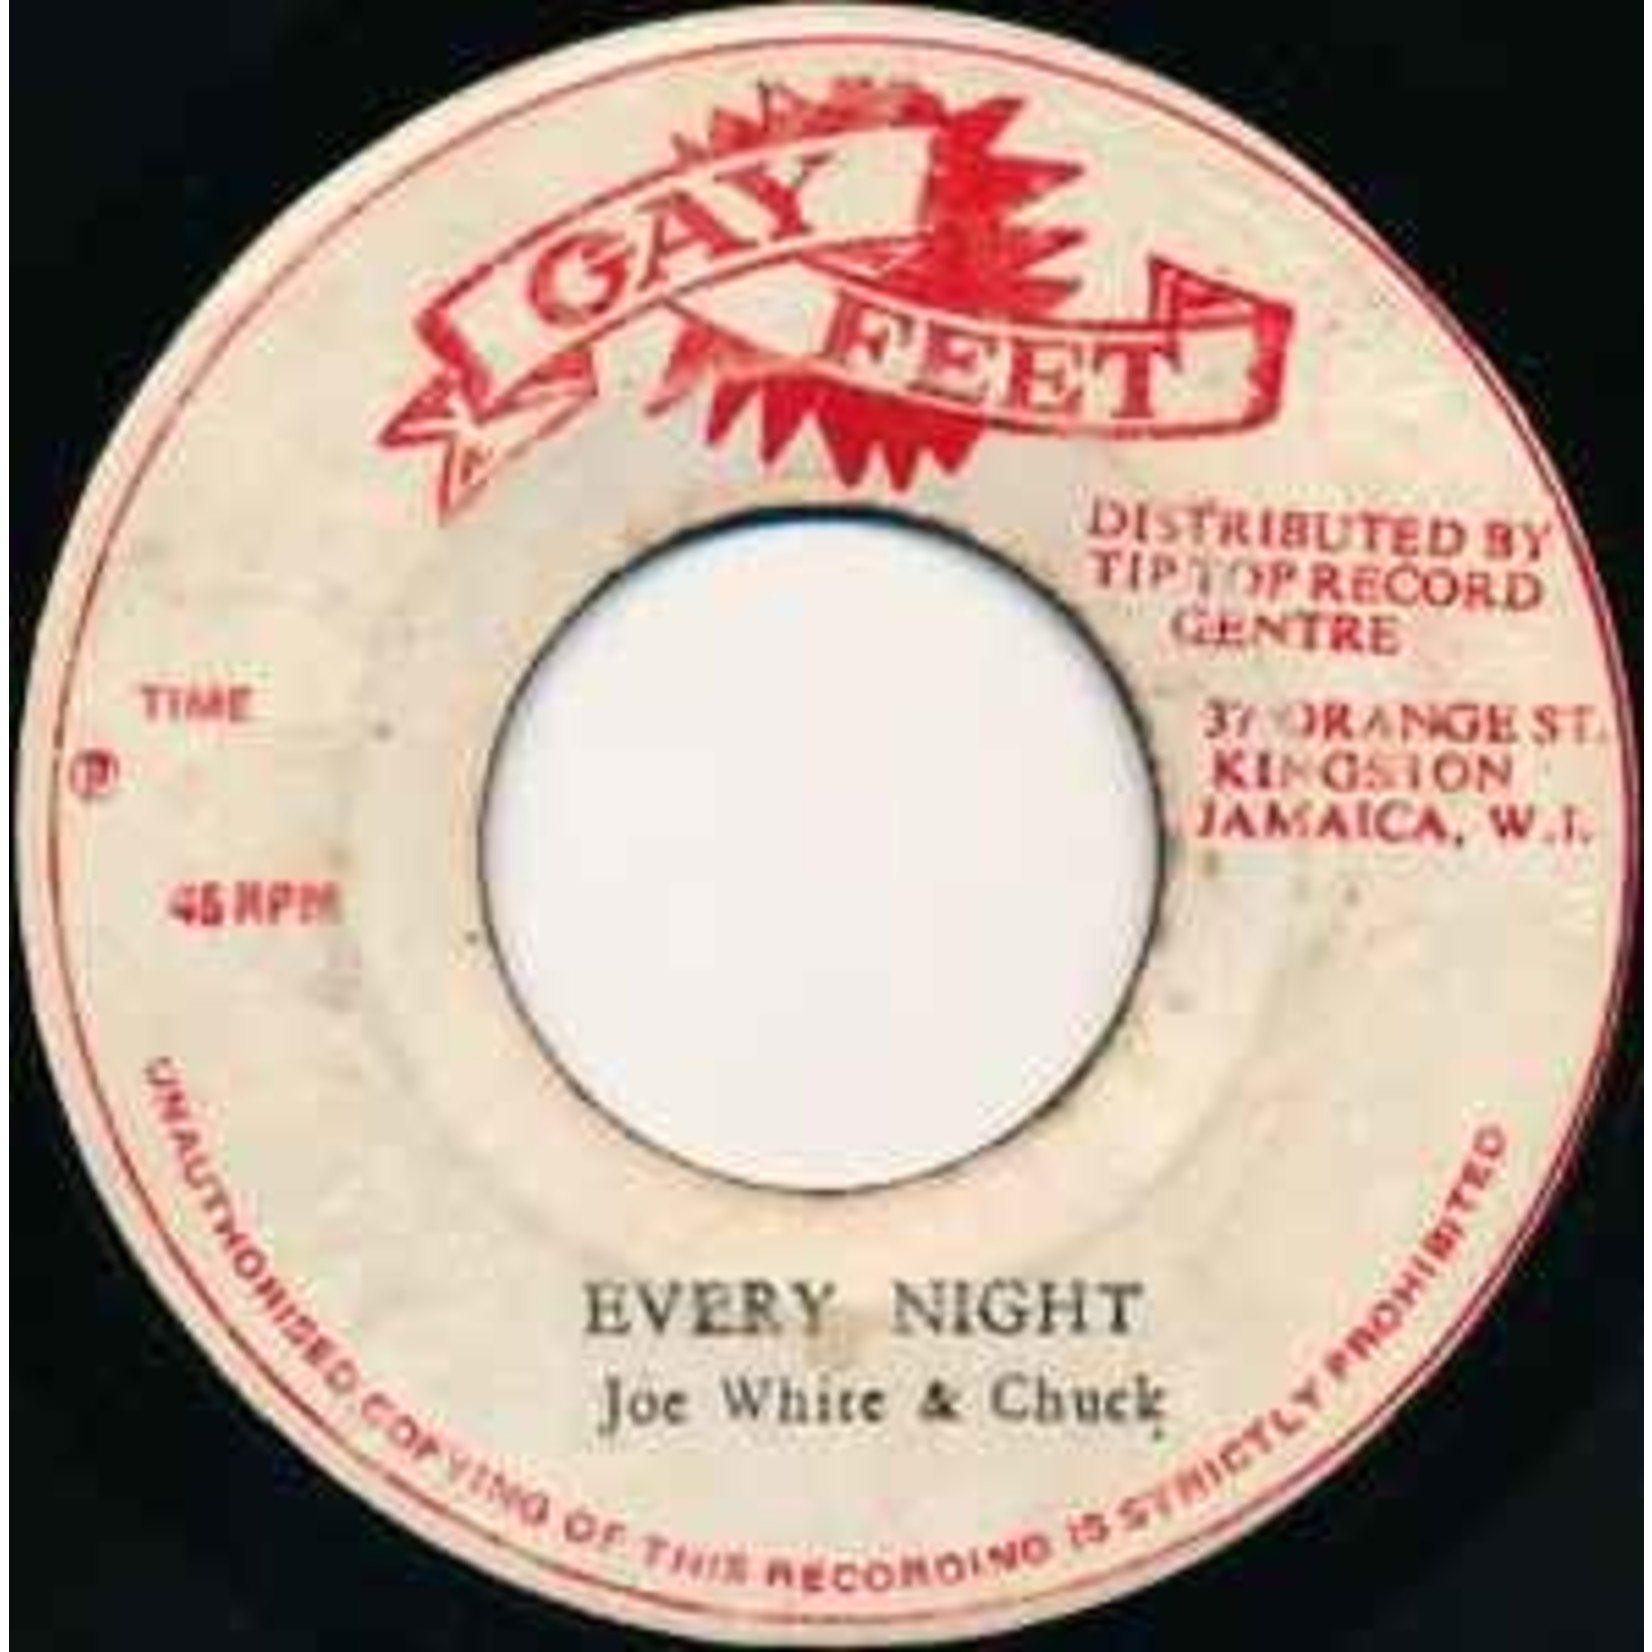 [7"] Baba Brooks & His Recording Band - Everynight b/w 1st Session (7", Disc VG+)